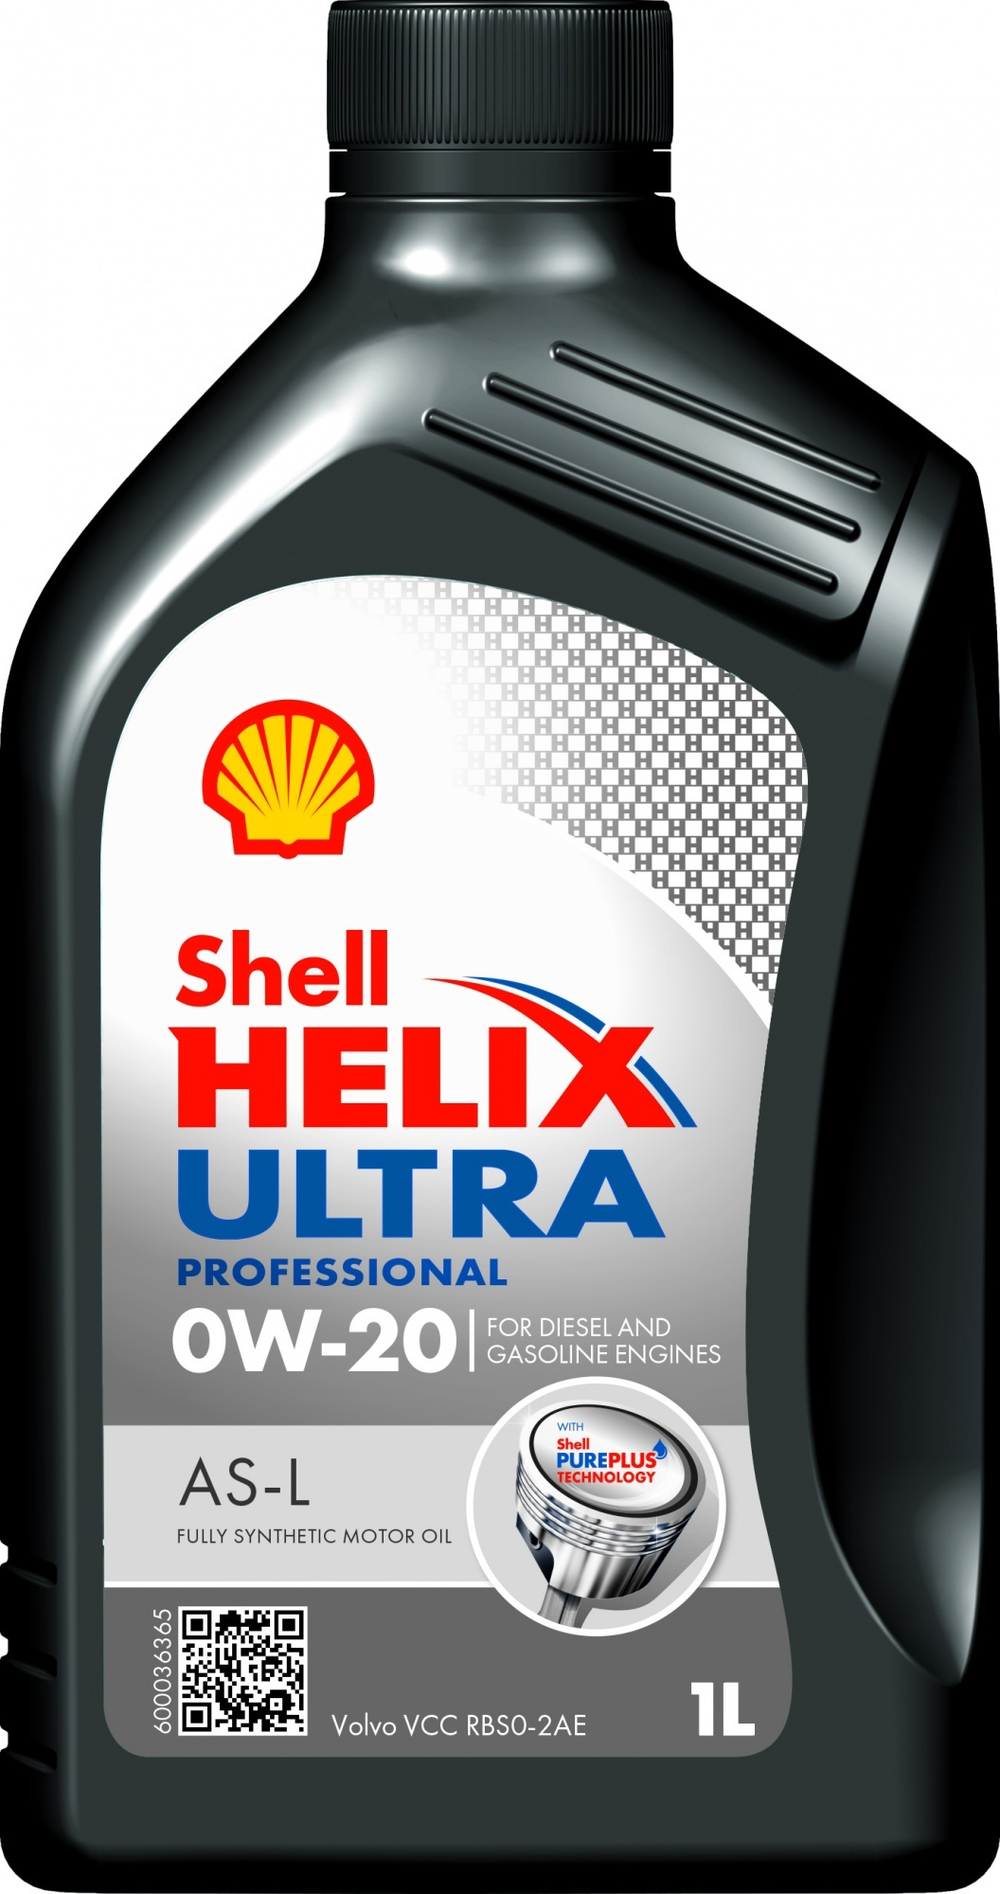 Shell Helix Ultra Professional AS-L 0W-20 209 л